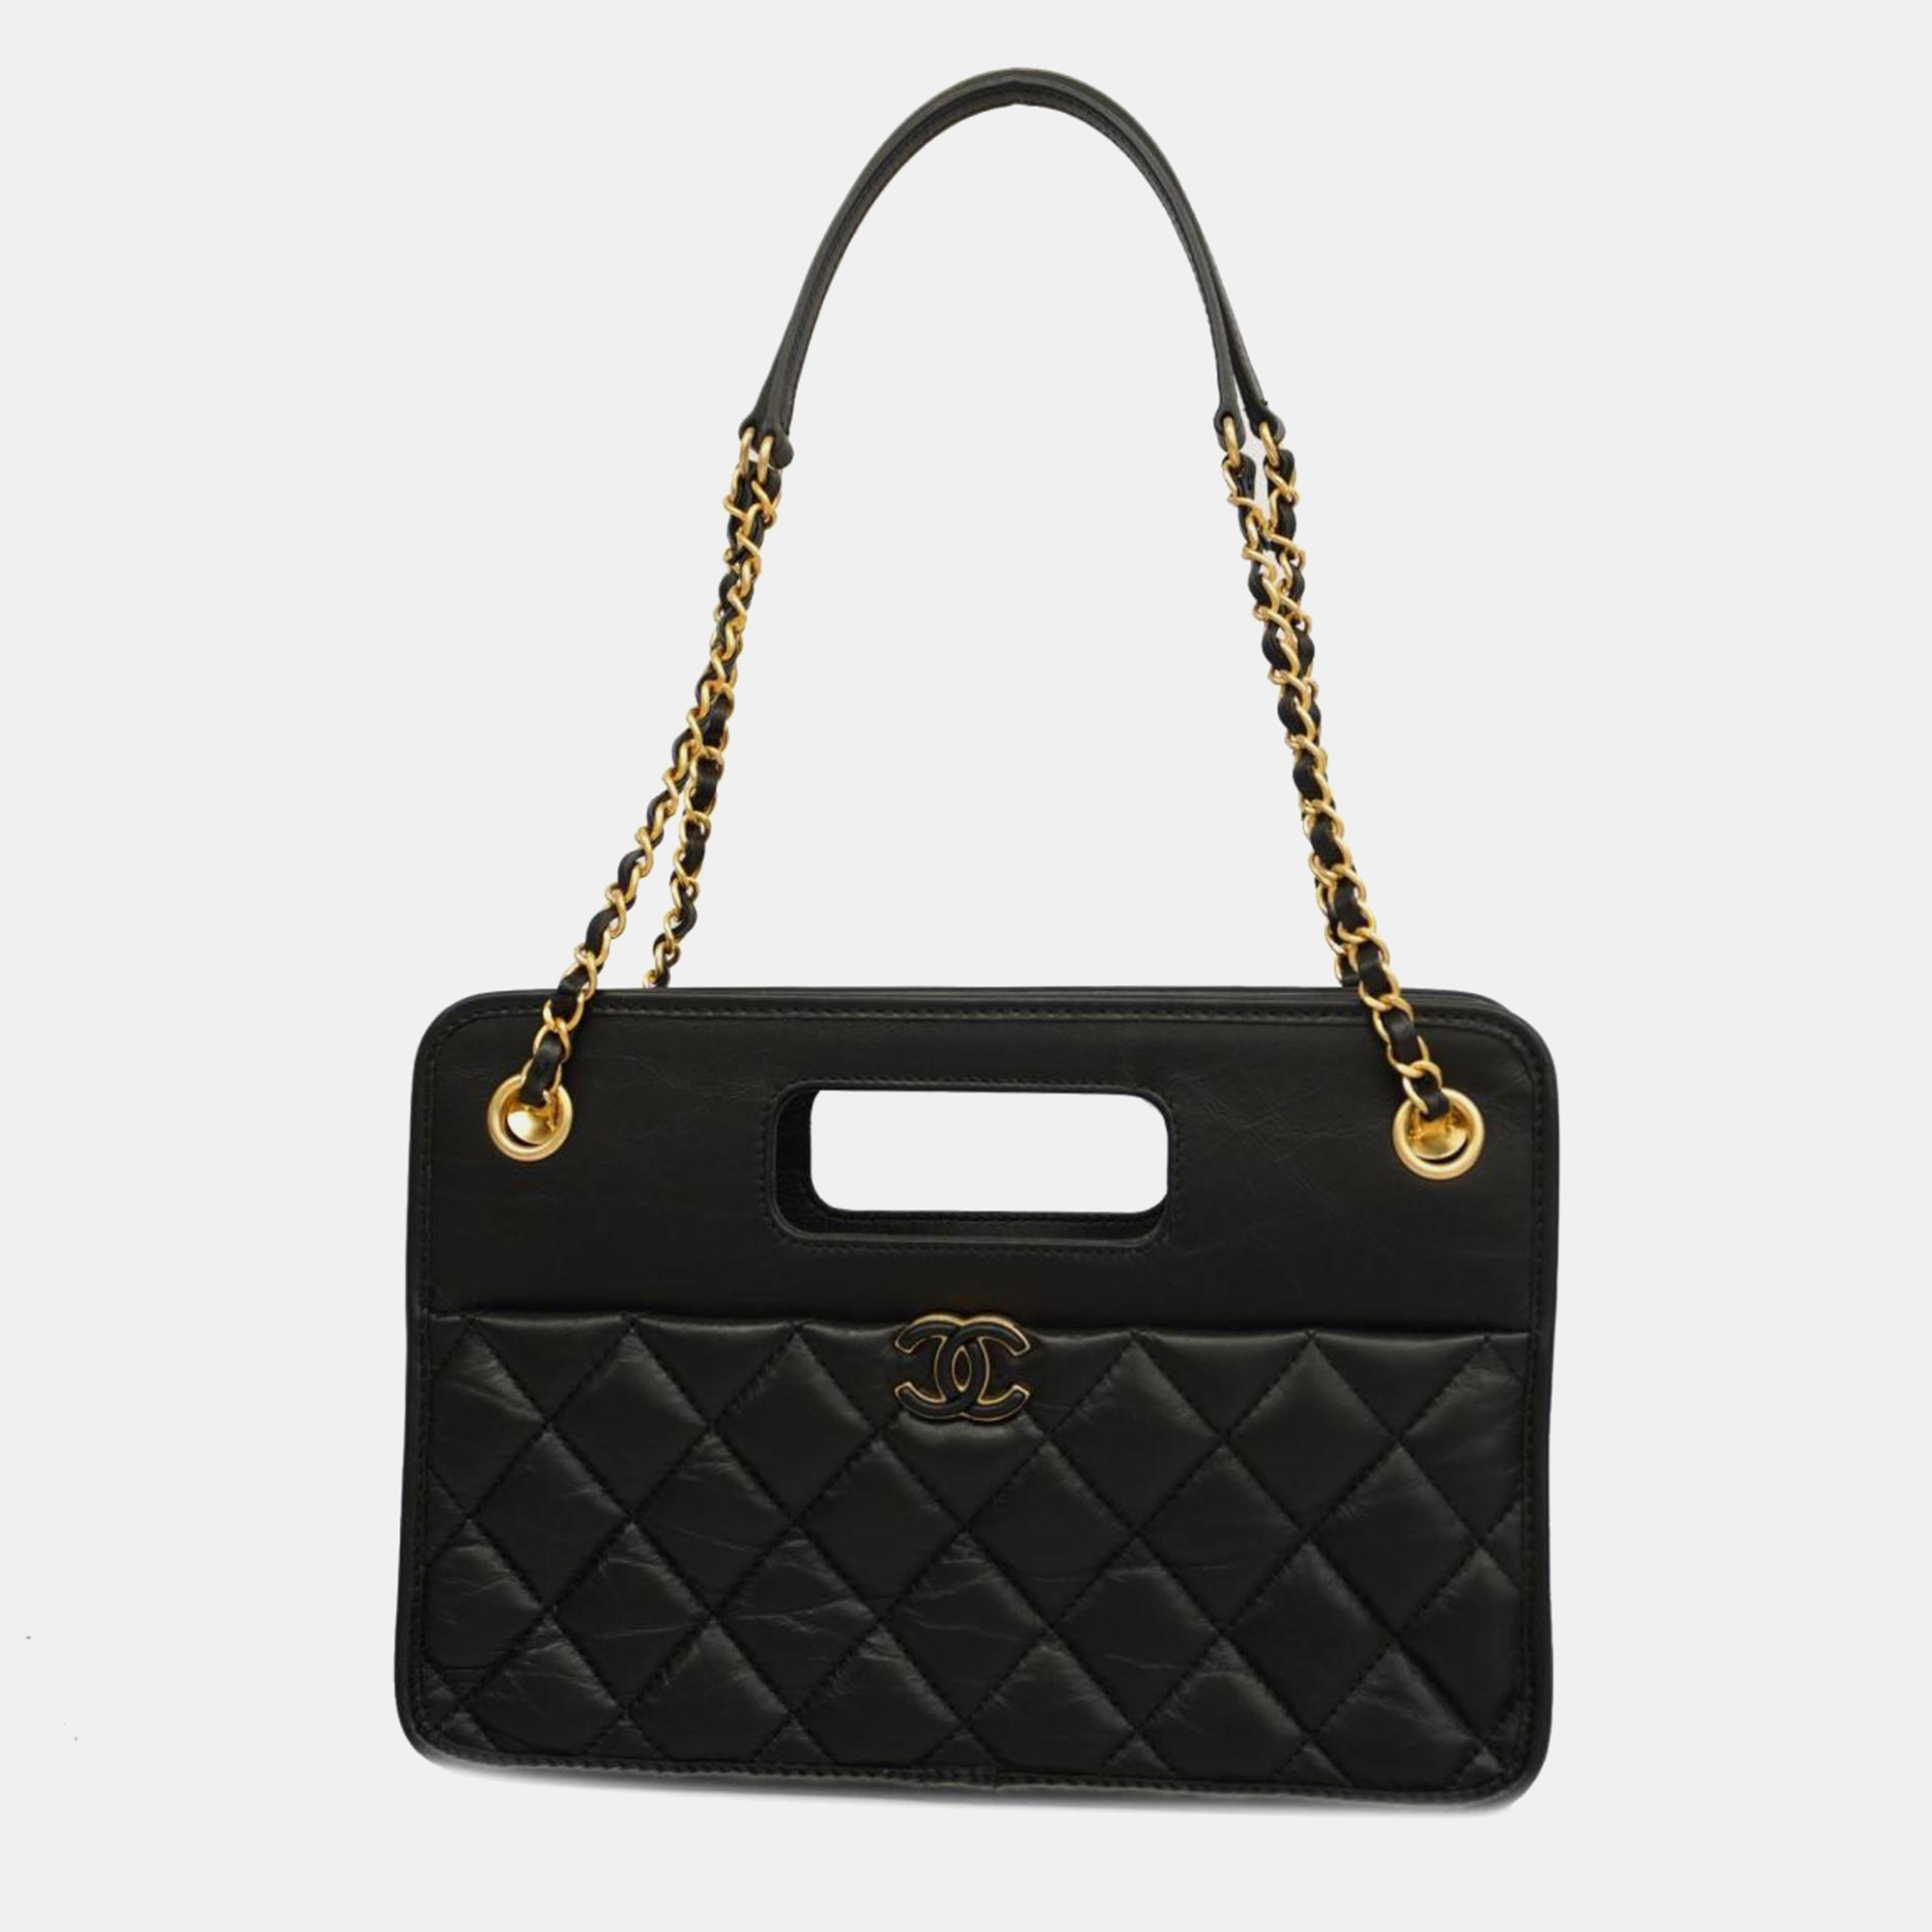 Chanel black lambskin leather graphic catch handle bag